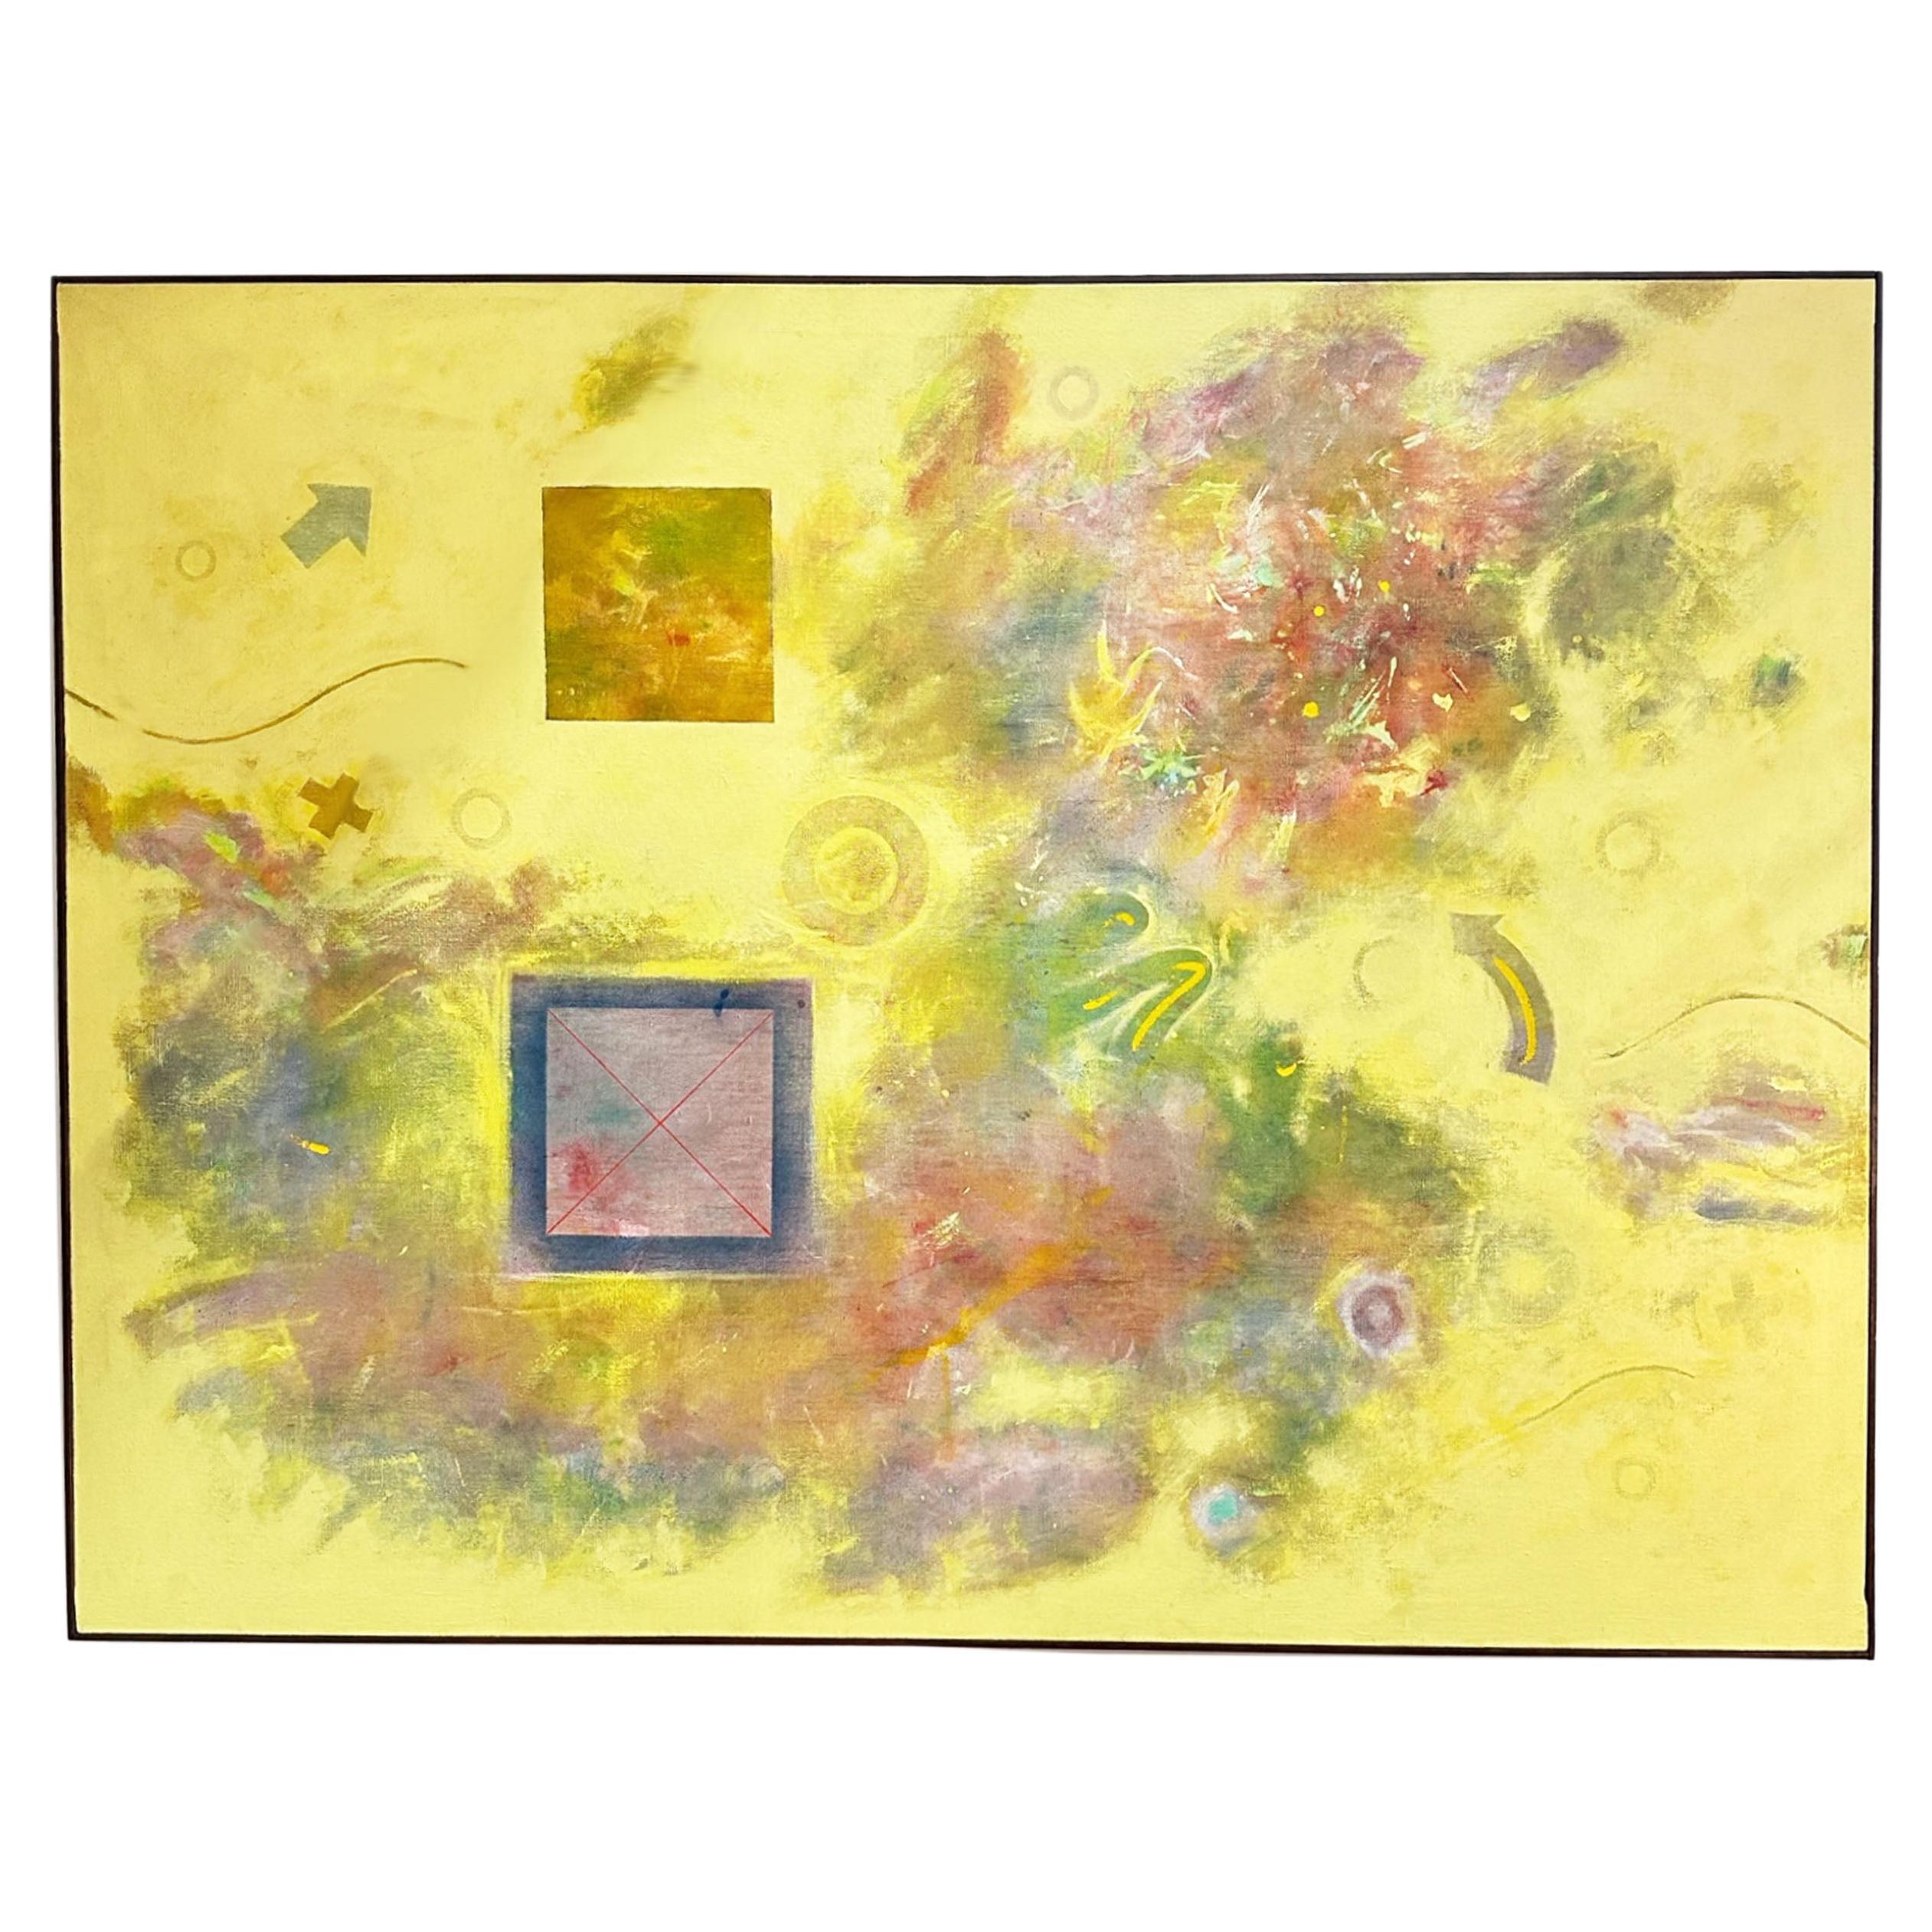 Robert Berkshire Signed 1974 “Homage to Turner II” Oil on Canvas Painting For Sale